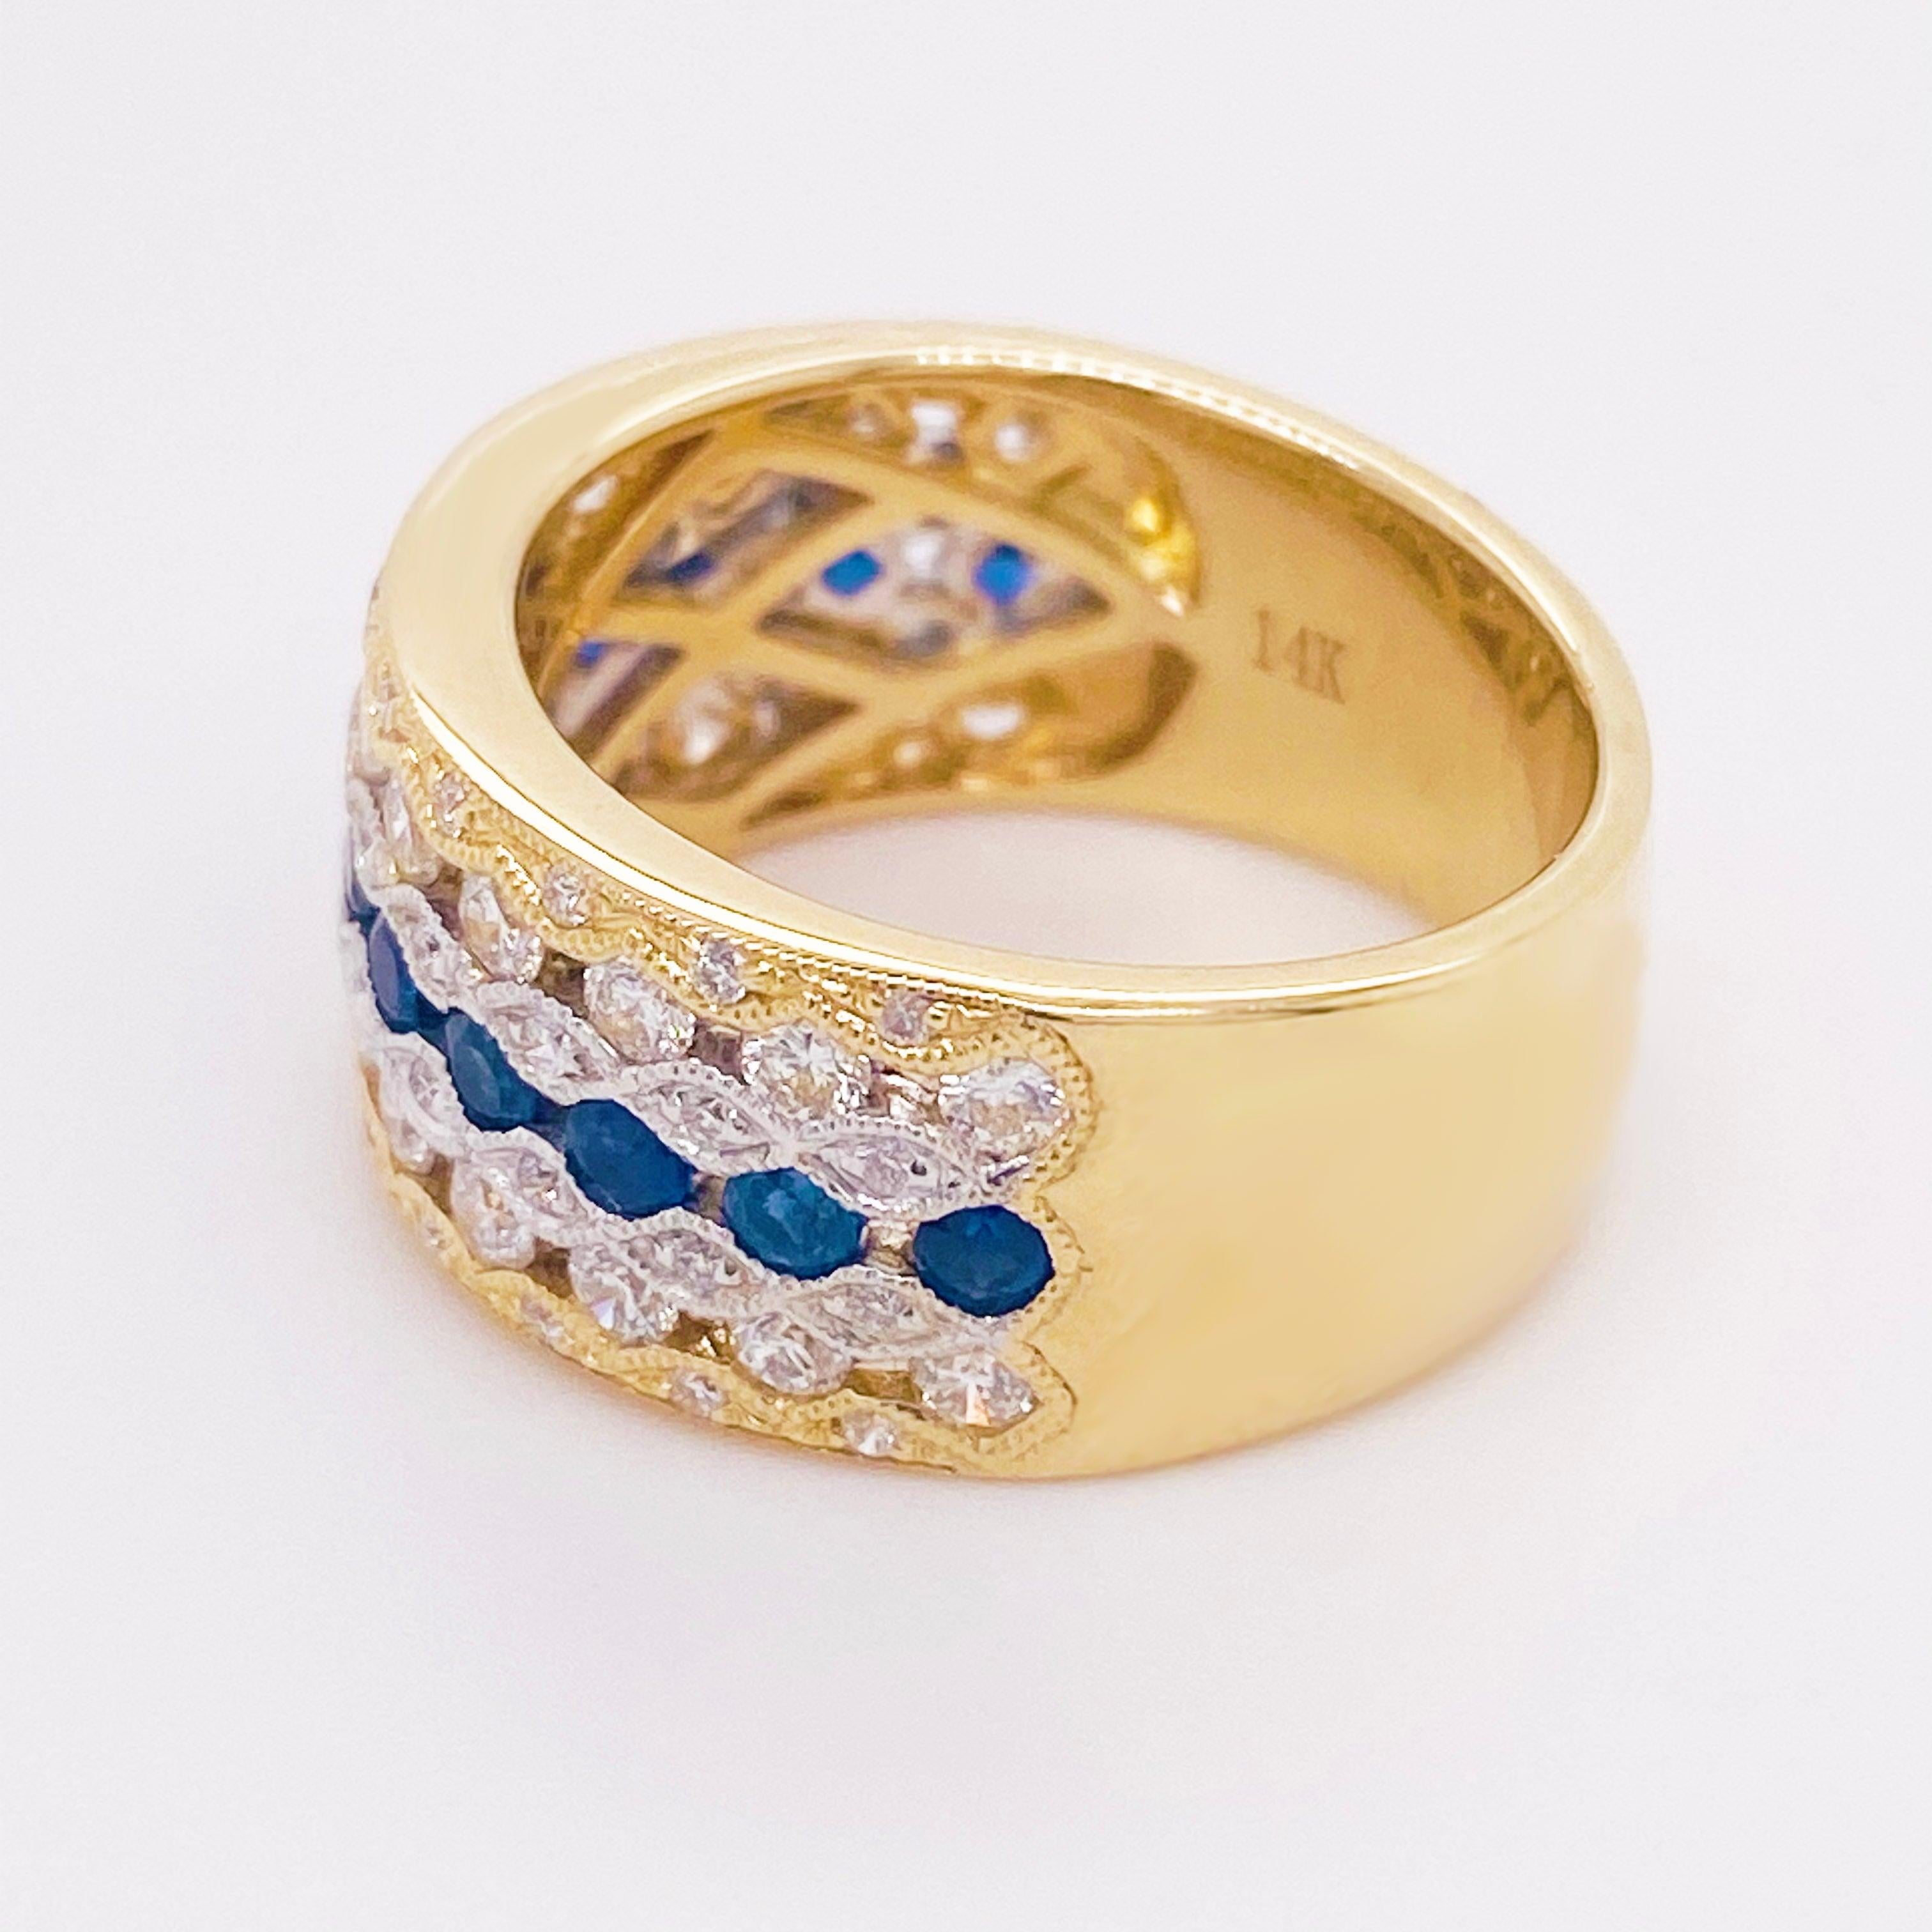 For Sale:  Sapphire Diamond Ring, Blue Sapphire, 14 Karat Yellow and White Gold, Cigar Band 4